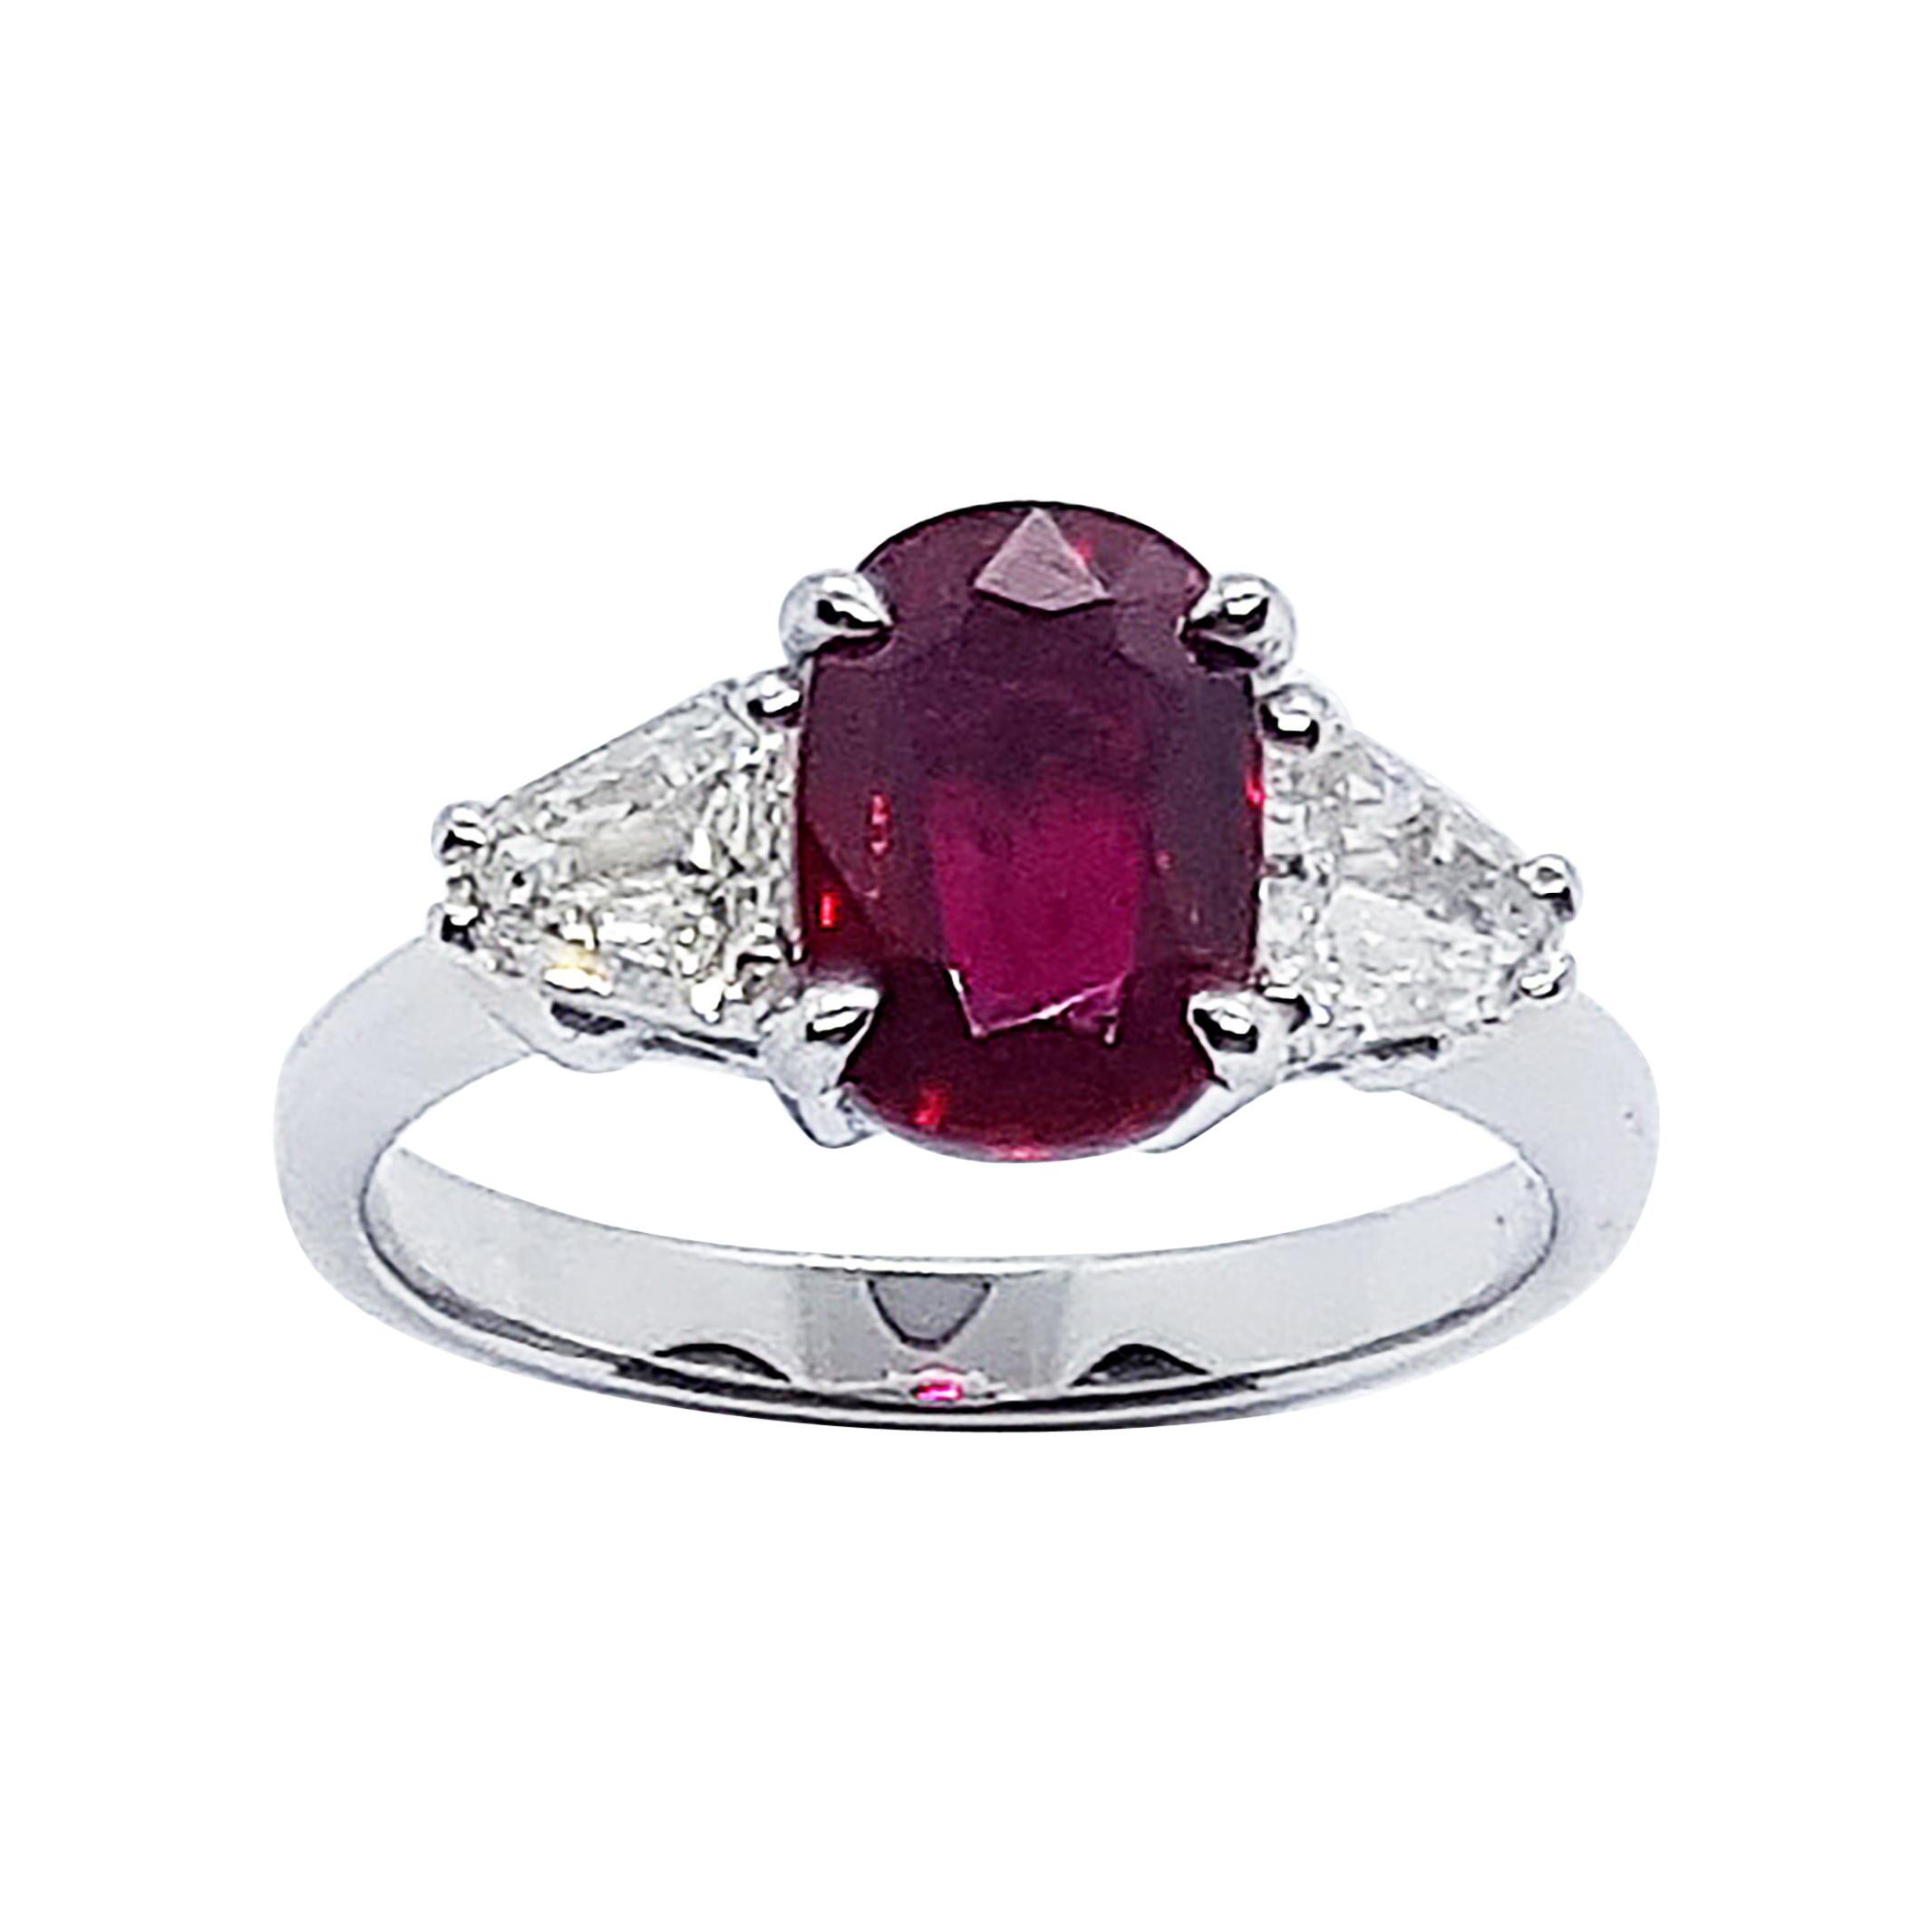 GIA Certified Unheated 1.56 Cts Ruby with Diamond Ring in 18 Karat White Gold